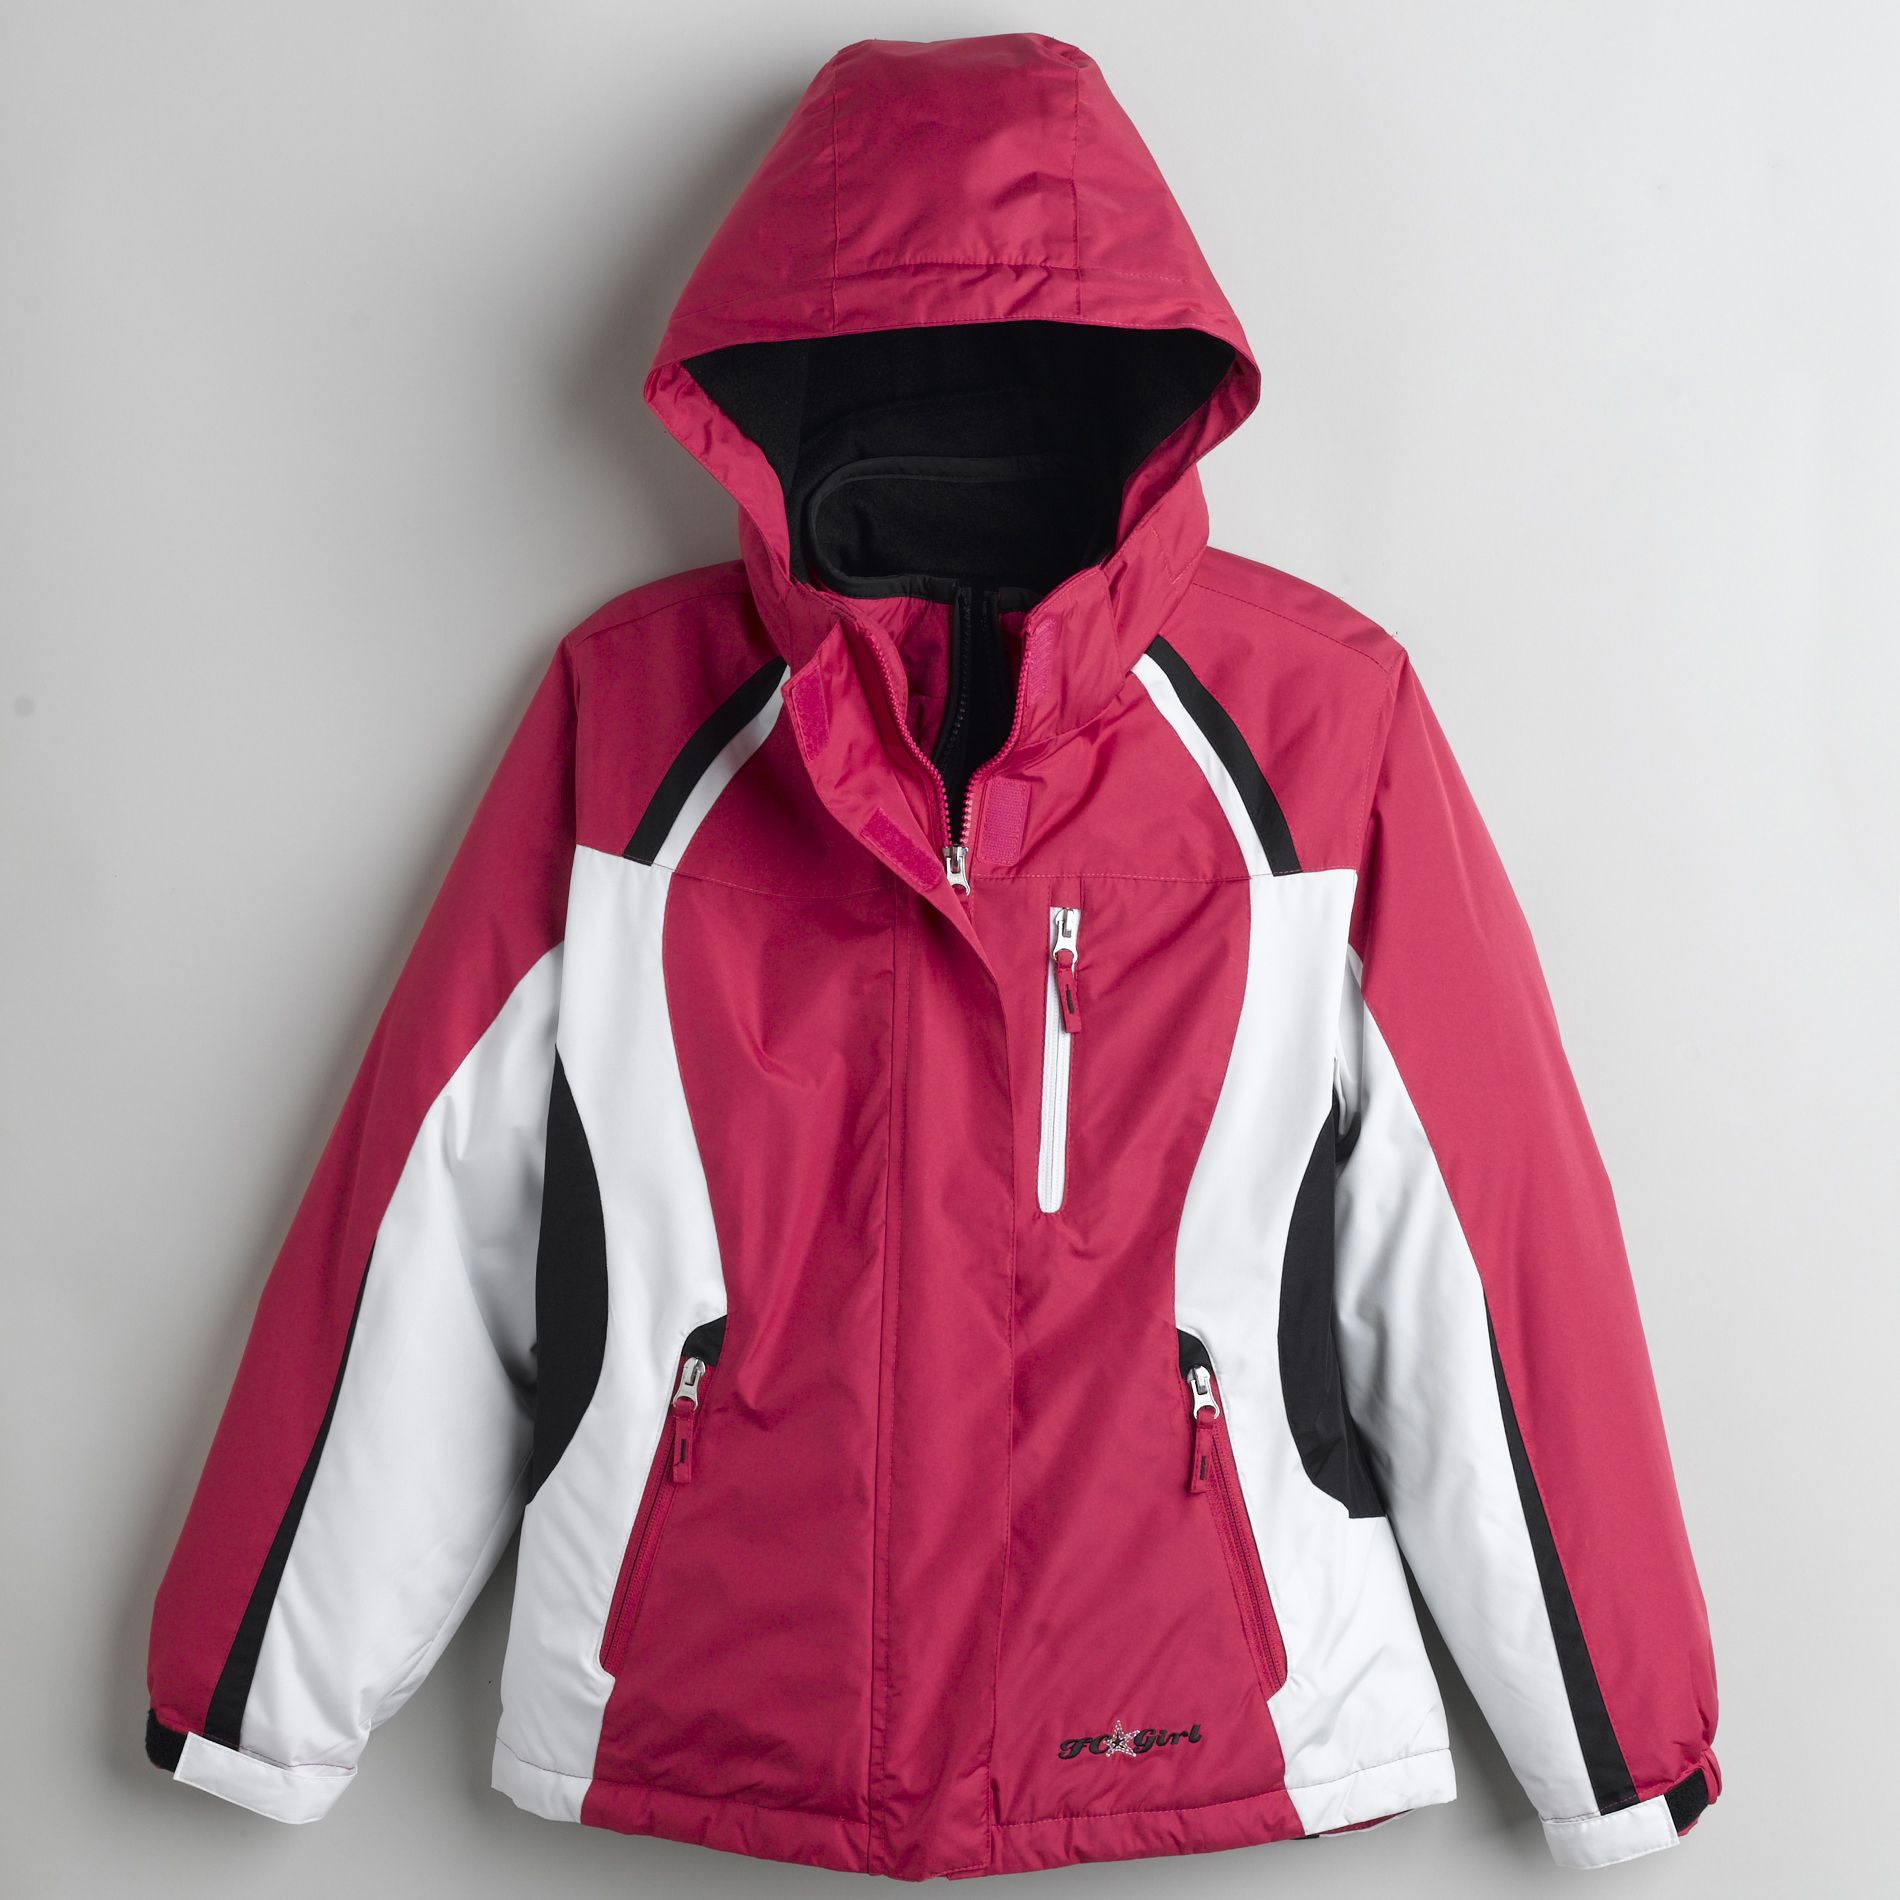 Free Country Girls' Winter Jacket 6-1 Systems